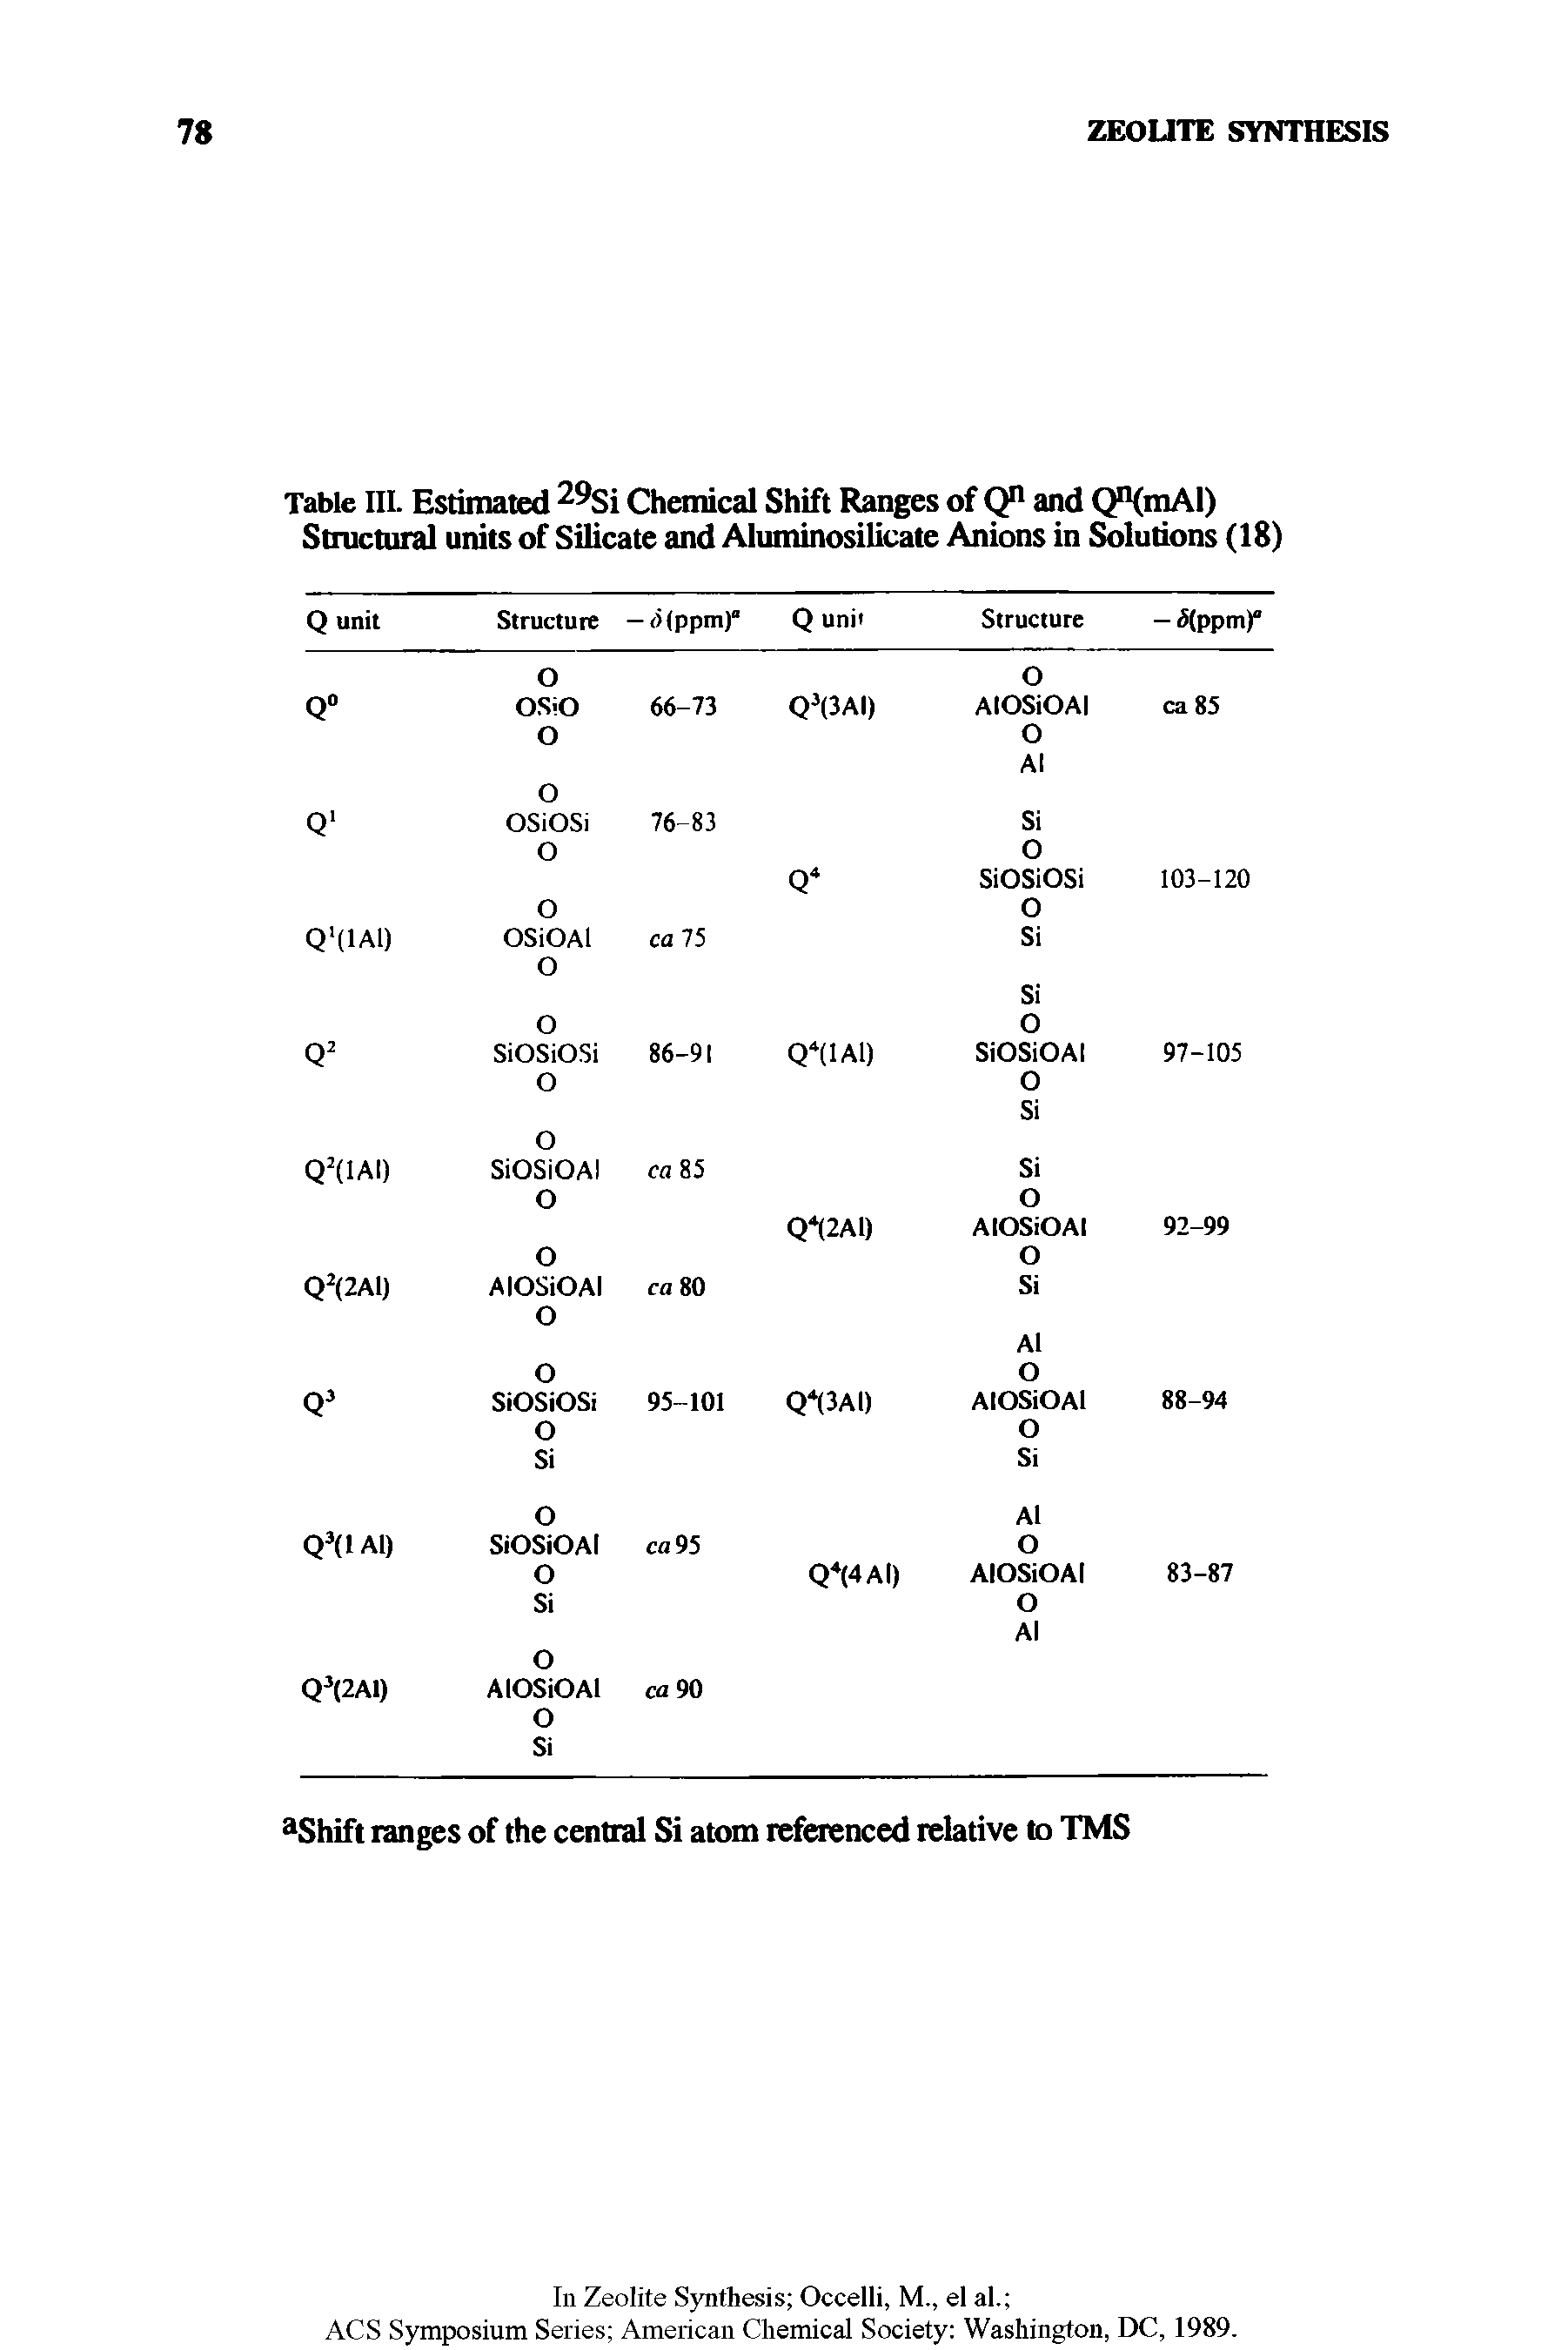 Table III. Estimated 2 Si Chemical Shift Ranges of Q11 and Q mAl) Structural units of Silicate and Aluminosilicate Anions in Solutions (18)...